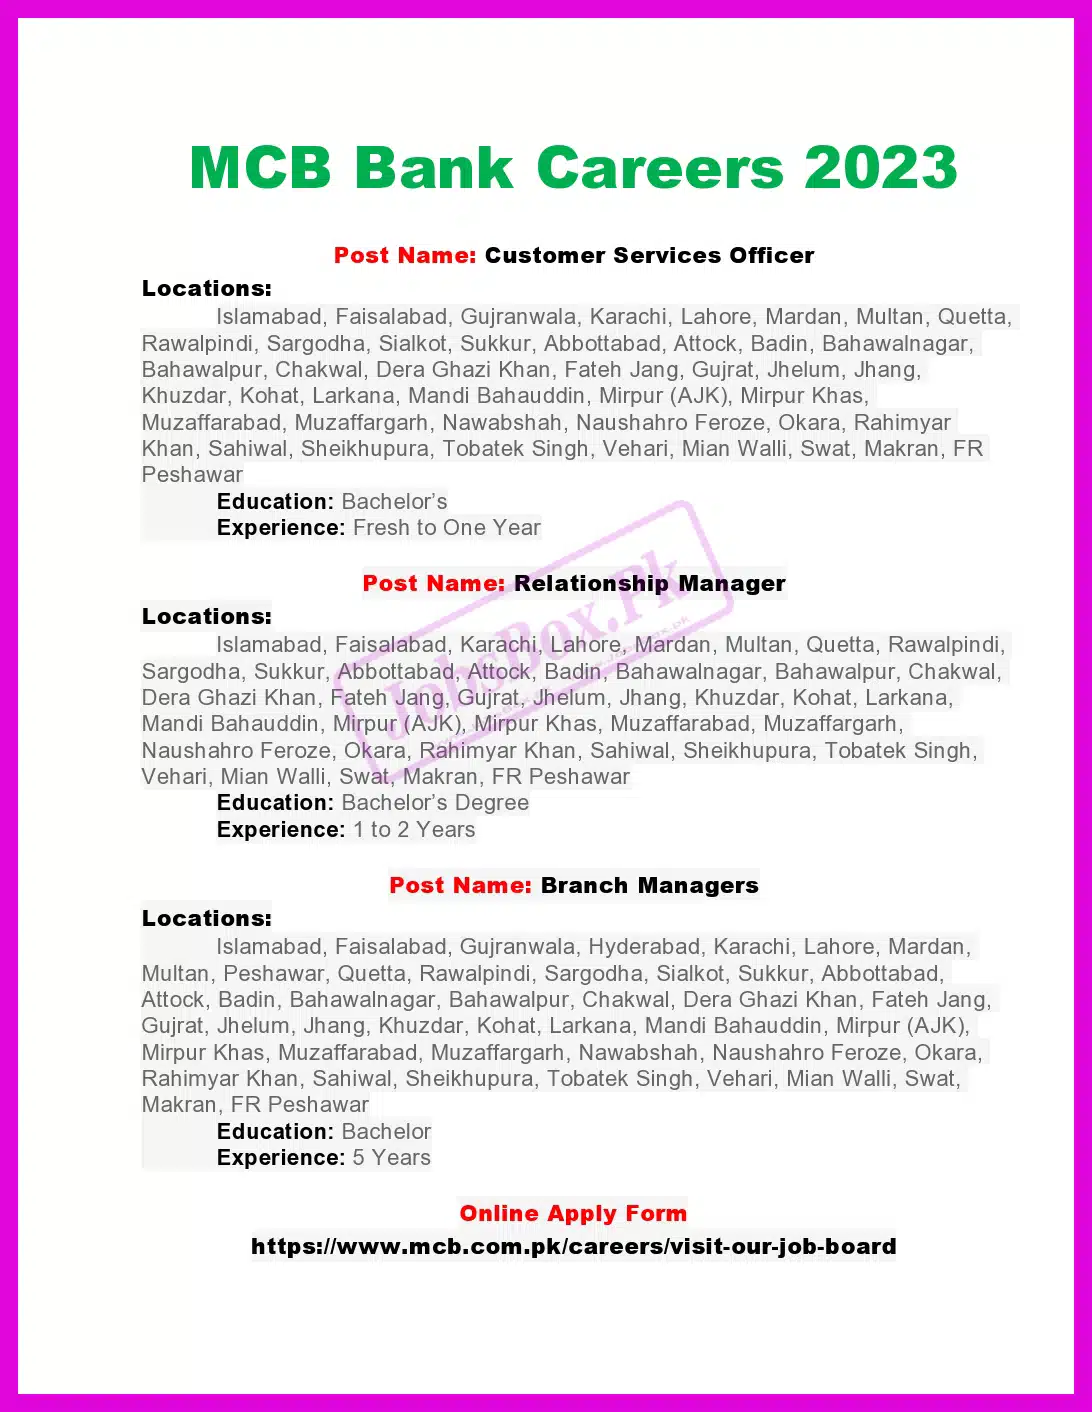 MCB Bank Recruitment of Branch Managers and Relationship Managers